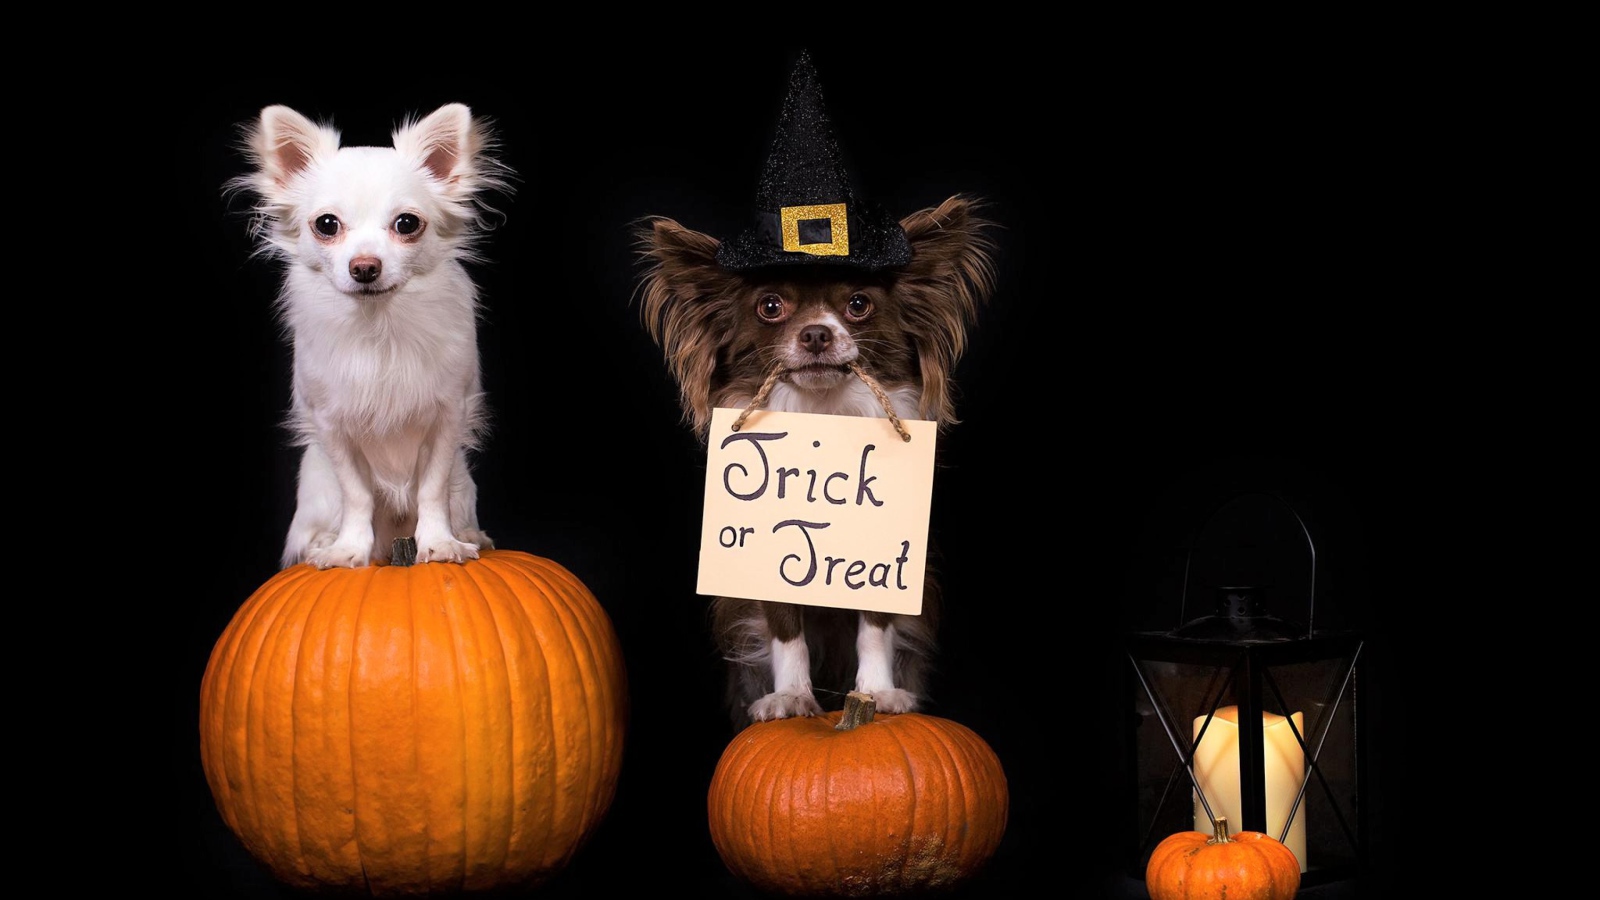 Two dogs of breed Chihuahua sit on pumpkins on a black background